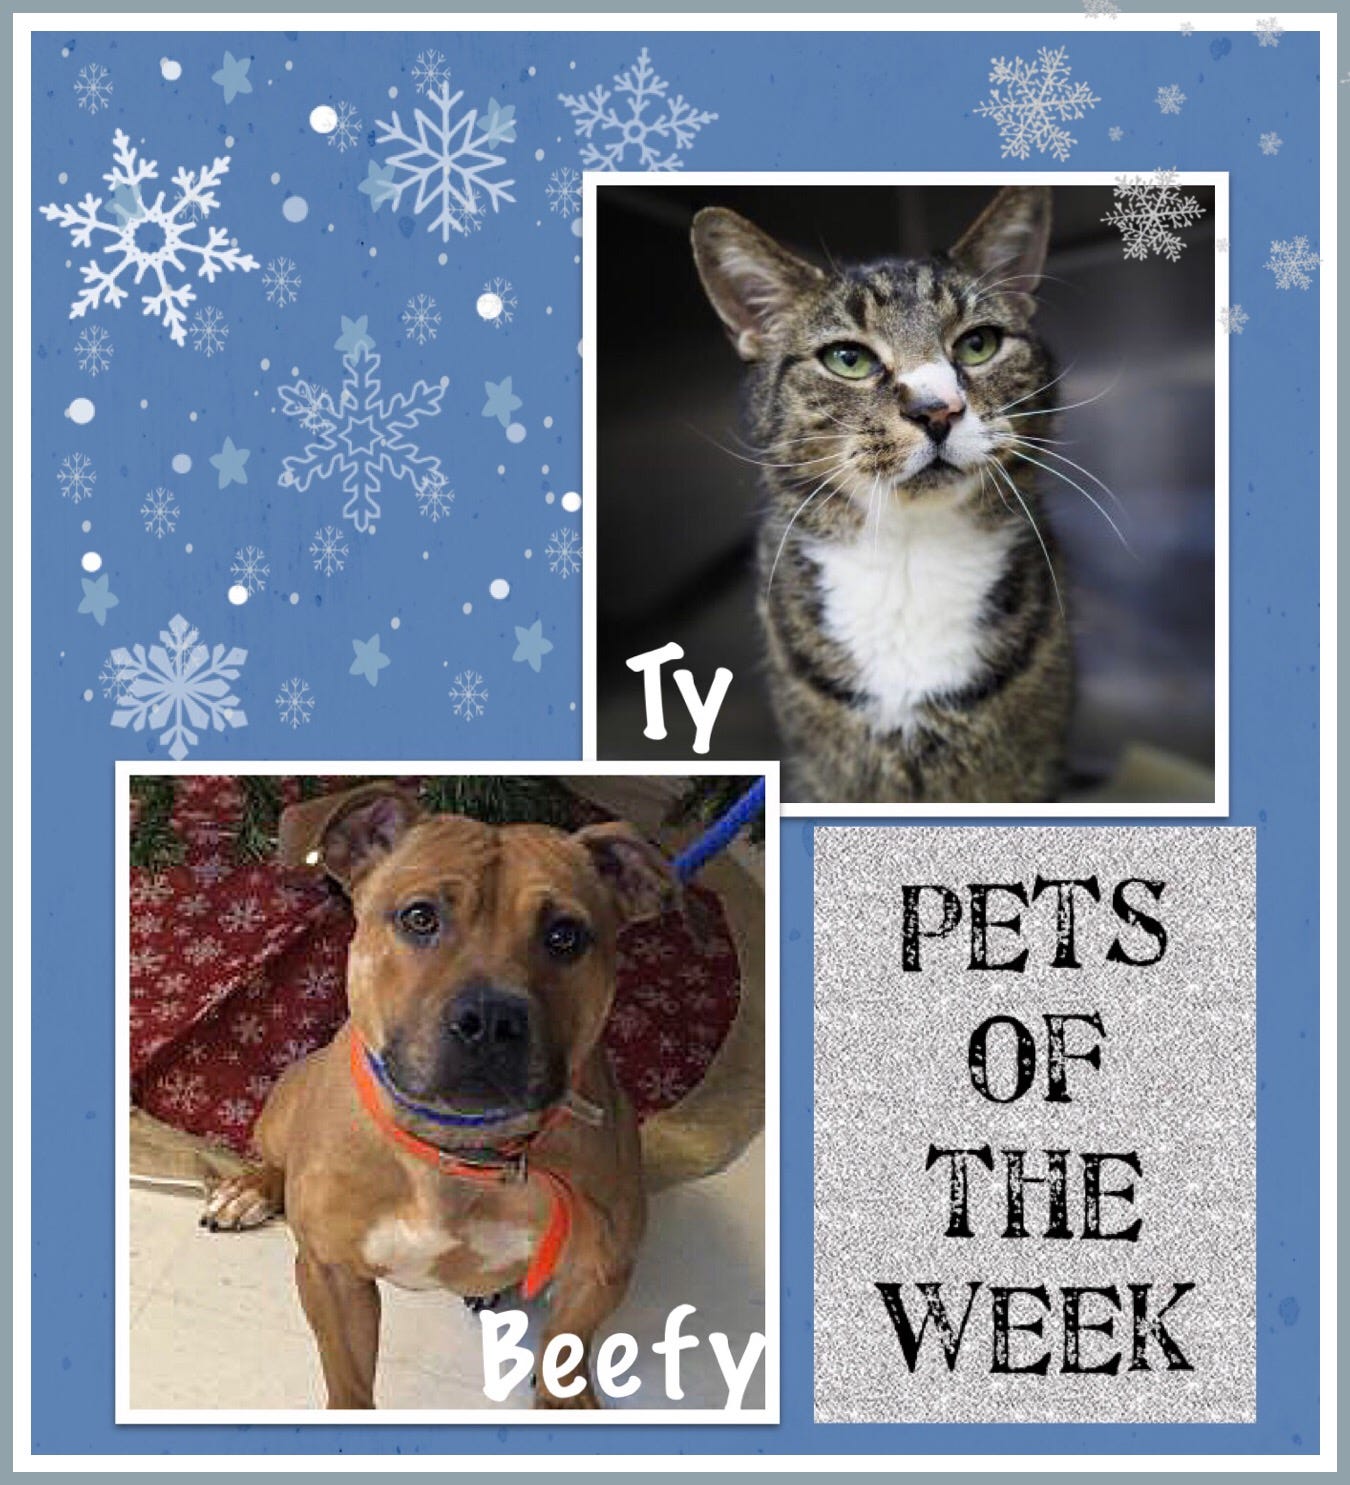 Pets of the Week: Winter Wonders - Ty and Beefy will keep you warm and cozy